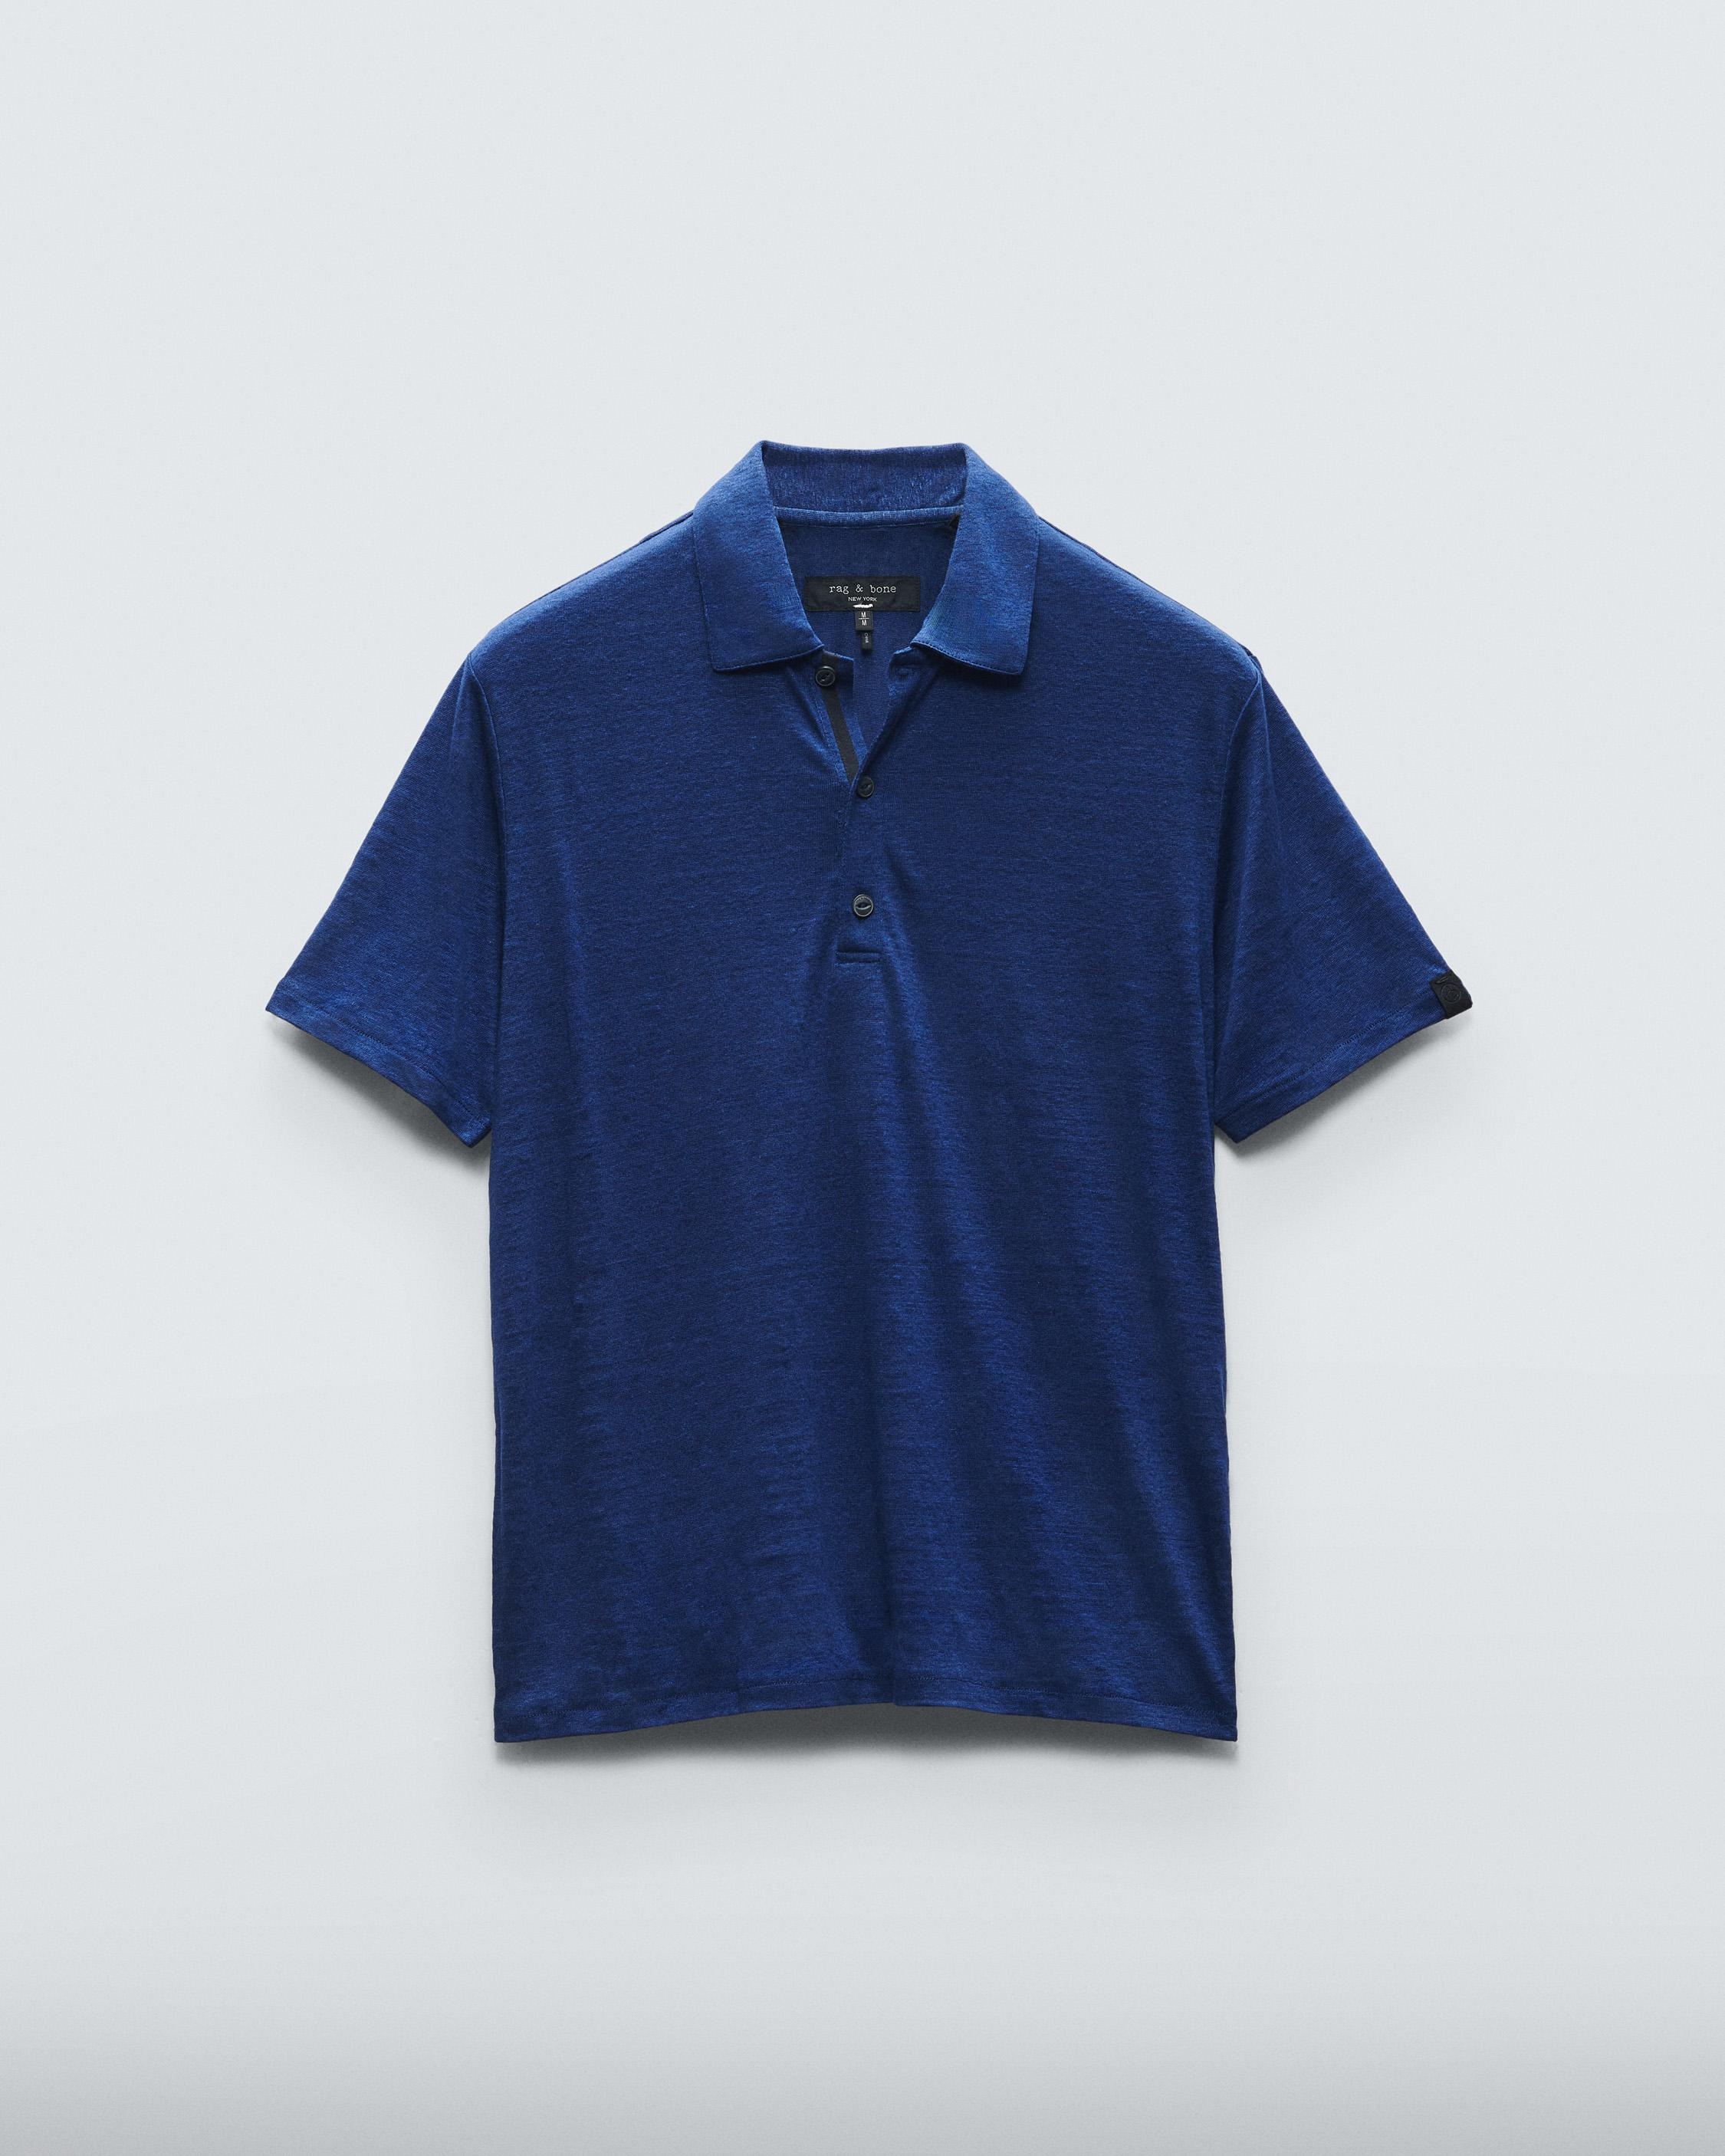 Classic Linen Polo
Classic Fit - 1